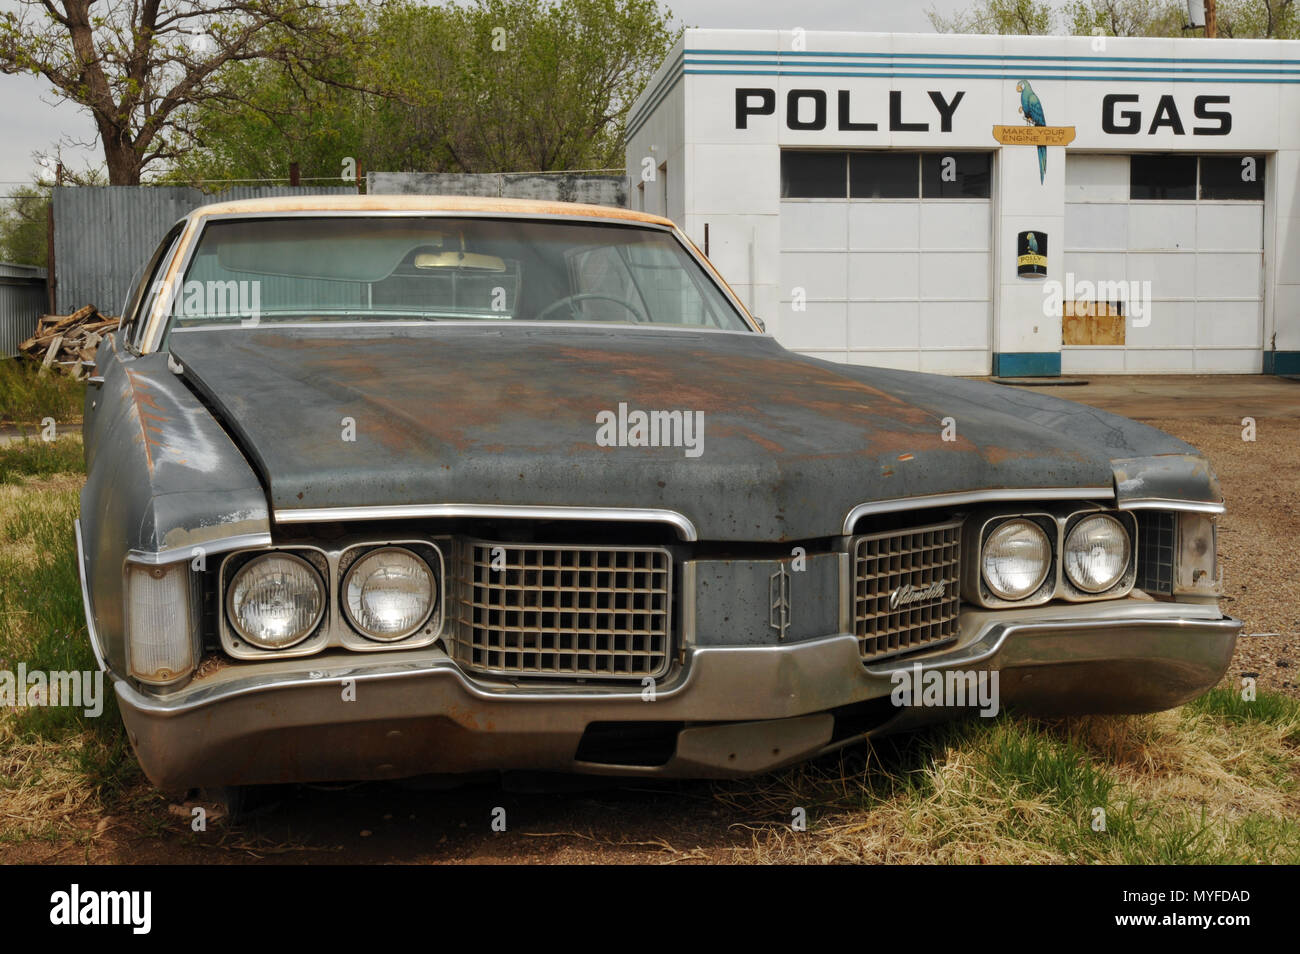 A rusting Oldsmobile sits in front of a former garage painted with a Polly Gas sign and logos in the Route 66 town of Tucumcari, New Mexico. Stock Photo